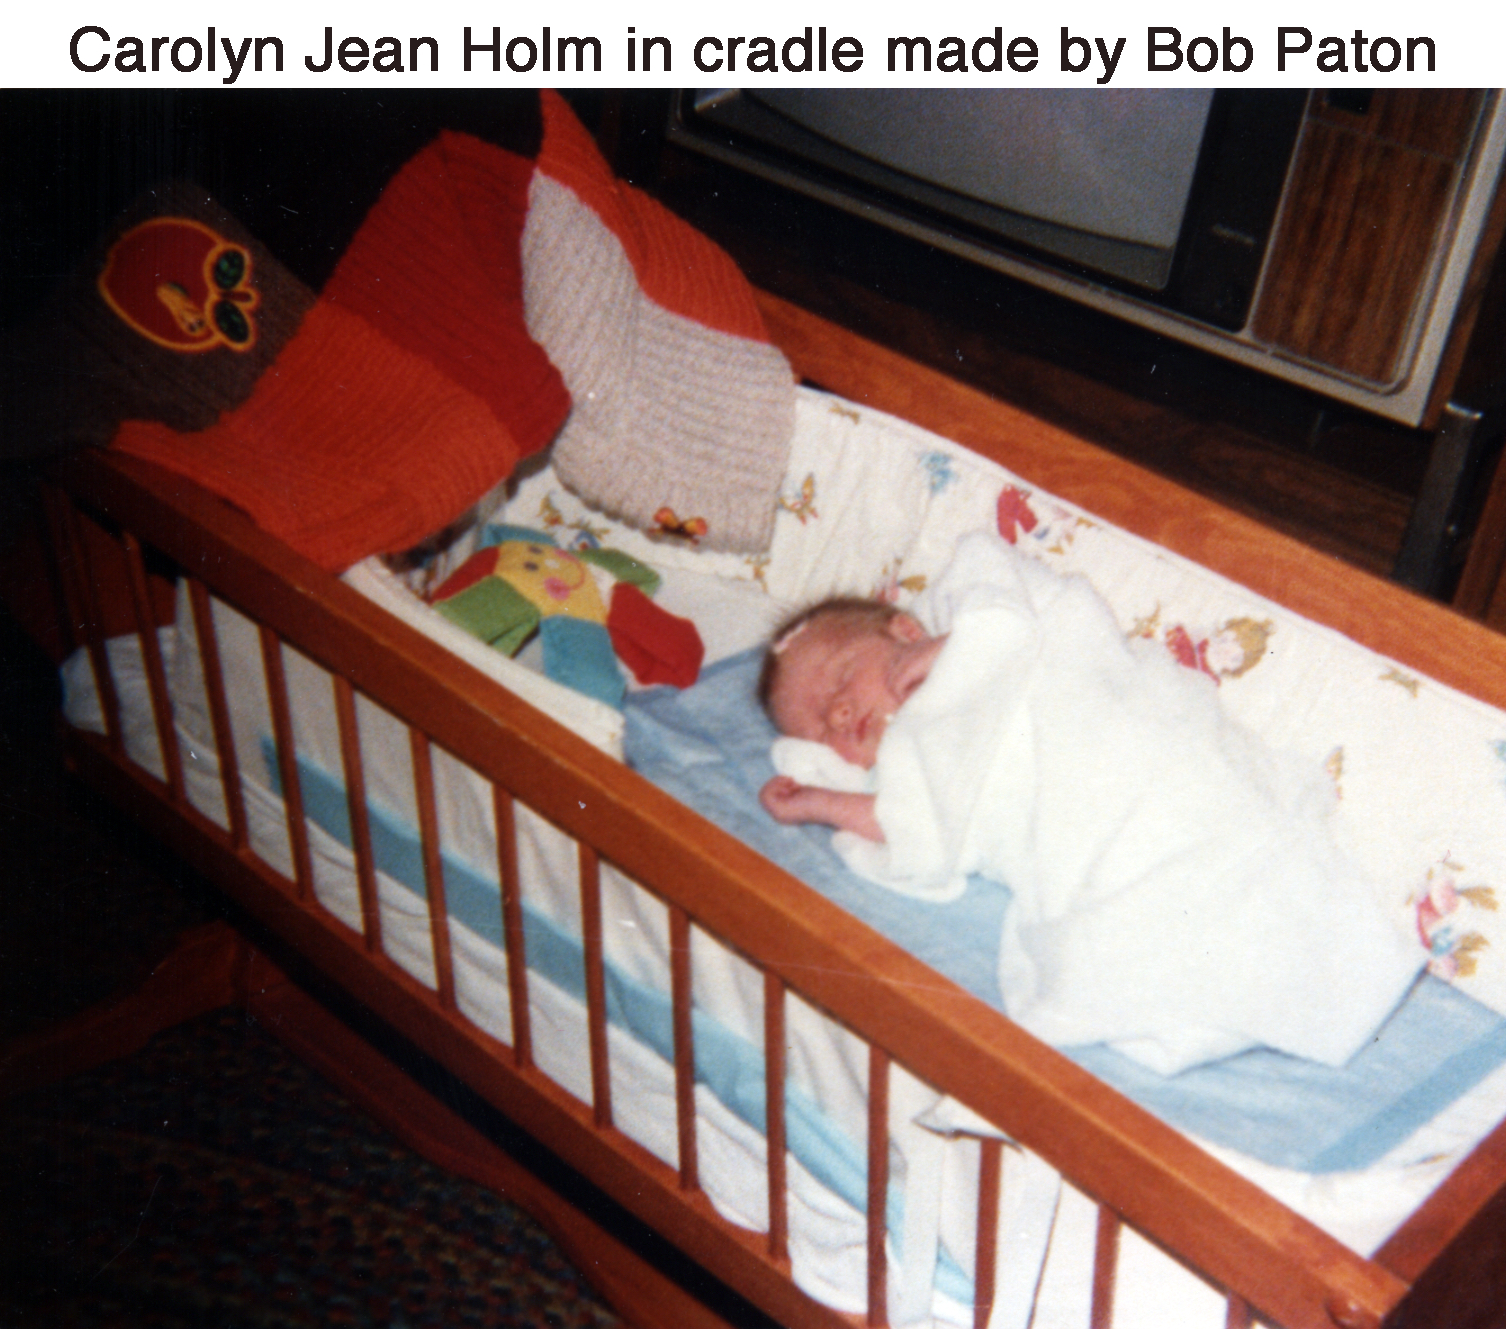 Infant CJ Holm sleeping in the wooden cradle